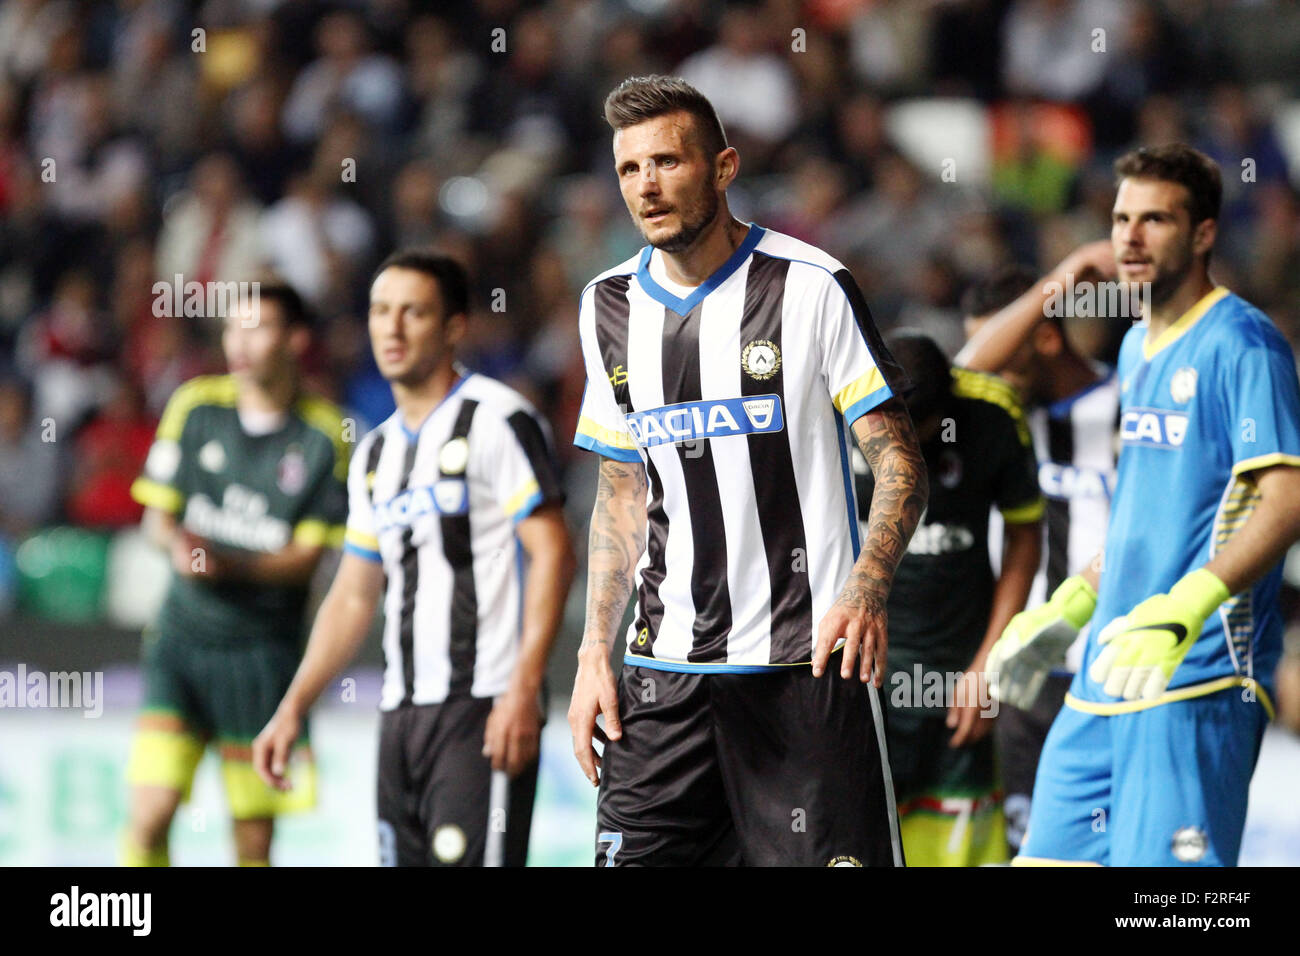 Udine, Italy. 22nd September, 2015. : Udinese's forward Cyril Thereau during the Italian Serie A football match between Udinese Calcio v AC Milan at Friuli Stadium on 22 Semptember, 2015 in Udine. Credit:  Andrea Spinelli/Alamy Live News Stock Photo